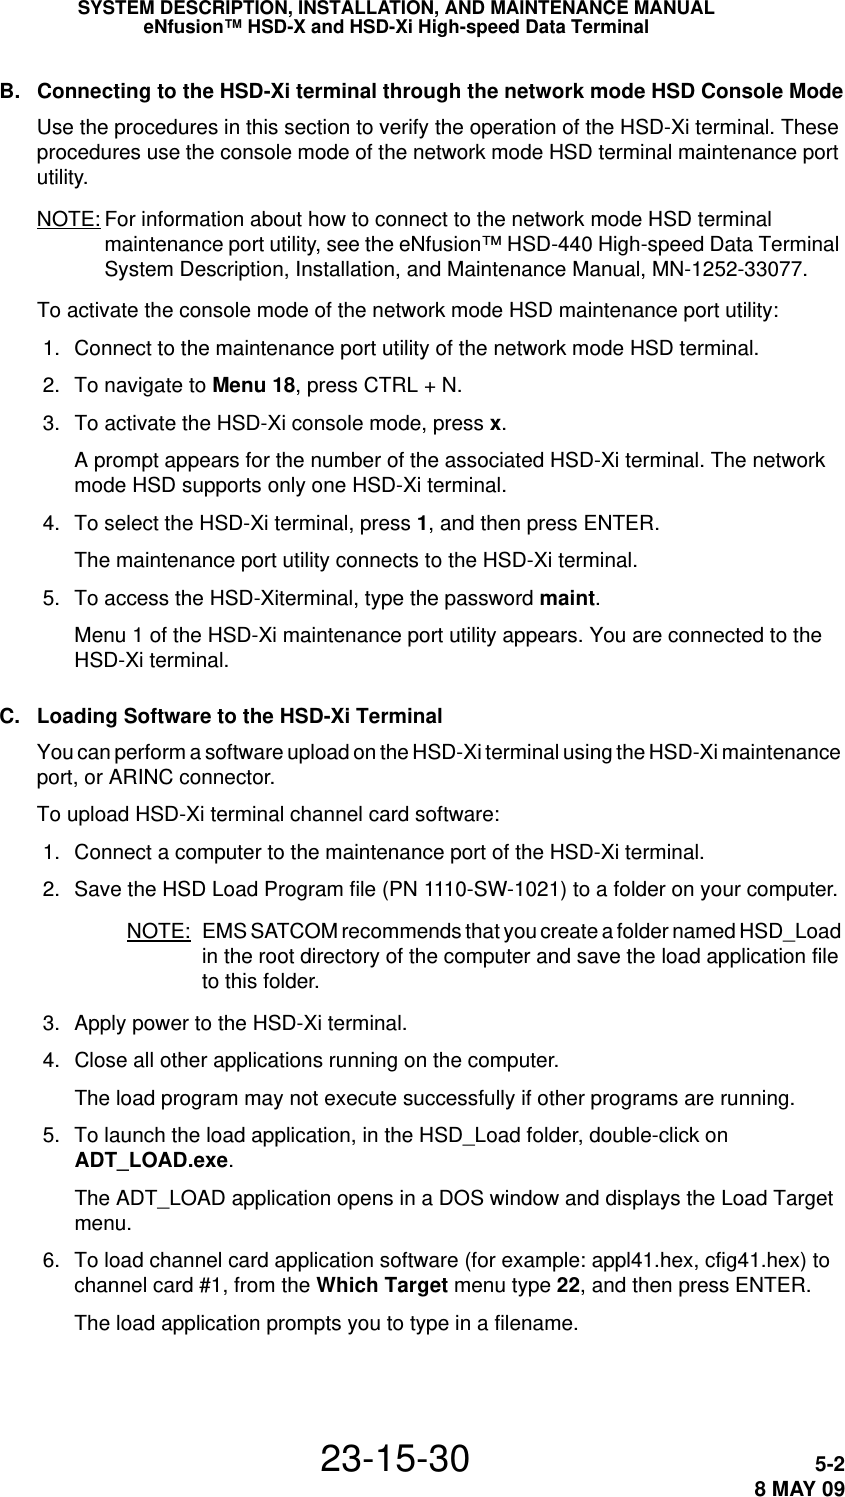 SYSTEM DESCRIPTION, INSTALLATION, AND MAINTENANCE MANUALeNfusion™ HSD-X and HSD-Xi High-speed Data Terminal23-15-30 5-28 MAY 09B. Connecting to the HSD-Xi terminal through the network mode HSD Console ModeUse the procedures in this section to verify the operation of the HSD-Xi terminal. These procedures use the console mode of the network mode HSD terminal maintenance port utility.NOTE: For information about how to connect to the network mode HSD terminal maintenance port utility, see the eNfusion™ HSD-440 High-speed Data Terminal System Description, Installation, and Maintenance Manual, MN-1252-33077.To activate the console mode of the network mode HSD maintenance port utility: 1. Connect to the maintenance port utility of the network mode HSD terminal. 2. To navigate to Menu 18, press CTRL + N. 3. To activate the HSD-Xi console mode, press x.A prompt appears for the number of the associated HSD-Xi terminal. The network mode HSD supports only one HSD-Xi terminal. 4. To select the HSD-Xi terminal, press 1, and then press ENTER.The maintenance port utility connects to the HSD-Xi terminal. 5. To access the HSD-Xiterminal, type the password maint.Menu 1 of the HSD-Xi maintenance port utility appears. You are connected to the HSD-Xi terminal.C. Loading Software to the HSD-Xi TerminalYou can perform a software upload on the HSD-Xi terminal using the HSD-Xi maintenance port, or ARINC connector.To upload HSD-Xi terminal channel card software: 1. Connect a computer to the maintenance port of the HSD-Xi terminal. 2. Save the HSD Load Program file (PN 1110-SW-1021) to a folder on your computer.NOTE: EMS SATCOM recommends that you create a folder named HSD_Load in the root directory of the computer and save the load application file to this folder. 3. Apply power to the HSD-Xi terminal. 4. Close all other applications running on the computer.The load program may not execute successfully if other programs are running. 5. To launch the load application, in the HSD_Load folder, double-click on ADT_LOAD.exe.The ADT_LOAD application opens in a DOS window and displays the Load Target menu. 6. To load channel card application software (for example: appl41.hex, cfig41.hex) to channel card #1, from the Which Target menu type 22, and then press ENTER.The load application prompts you to type in a filename.